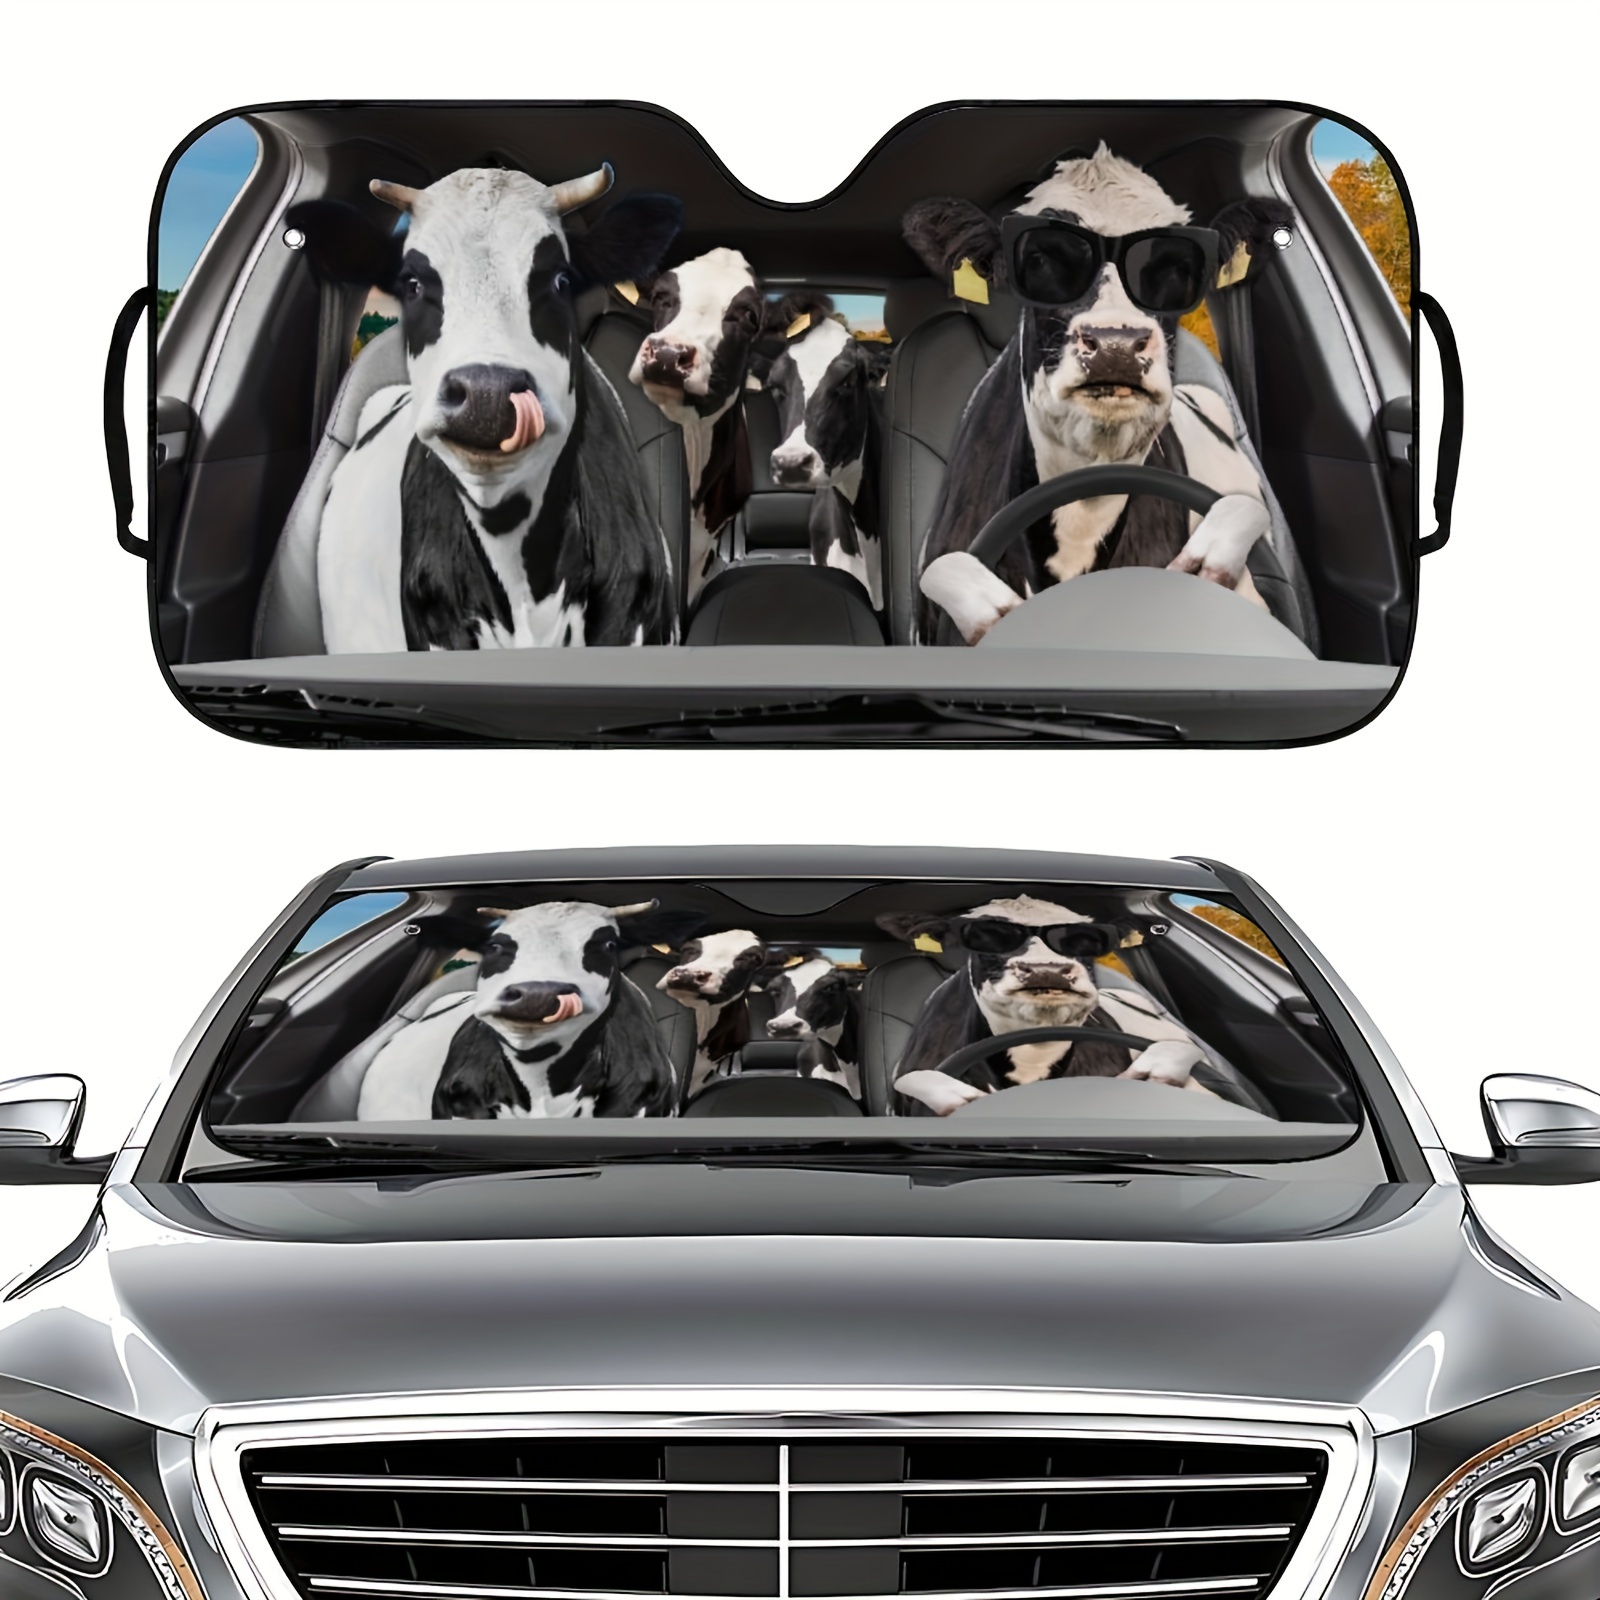 

1pc Car Windshield Sunshade With Cow Print, Suction Cup Installation, Foldable For Easy Storage